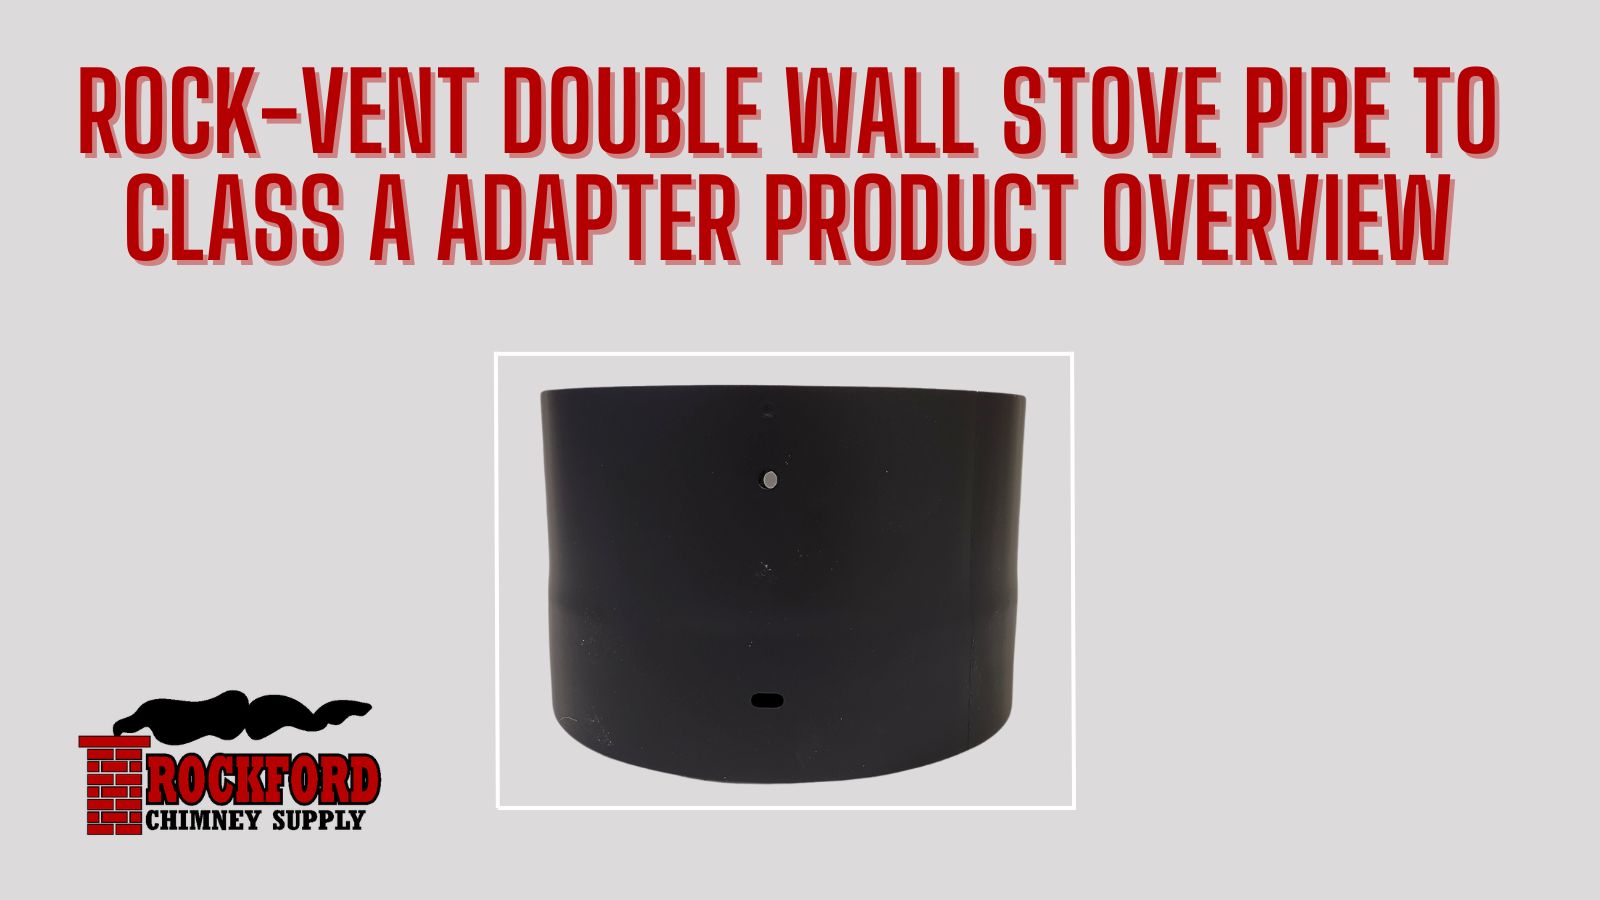 Double Wall to Class A Adapter Product Overview Video